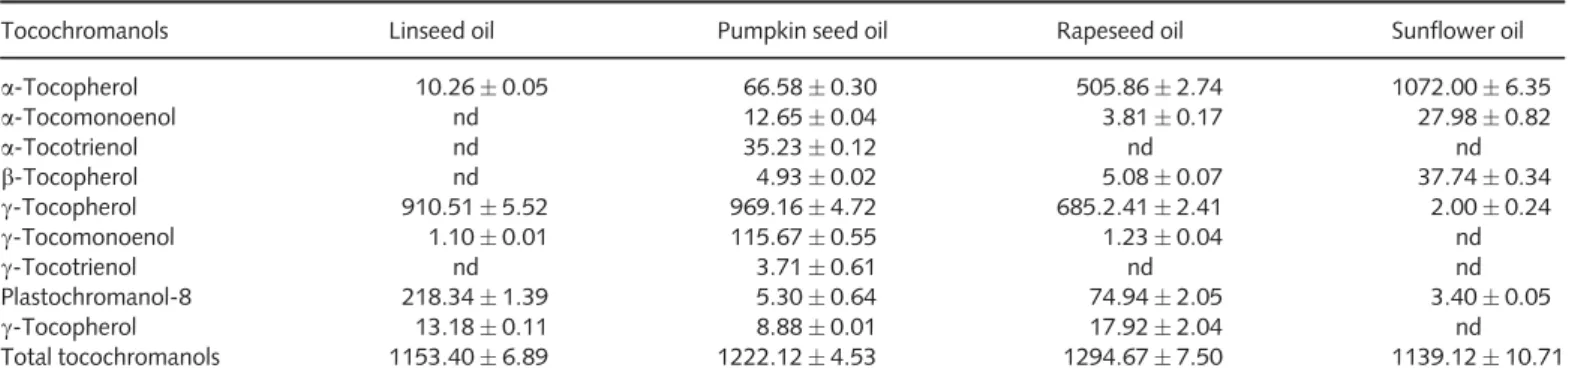 Table 2 Tocochromanols including tocomonoenol amounts in common plant seed oils